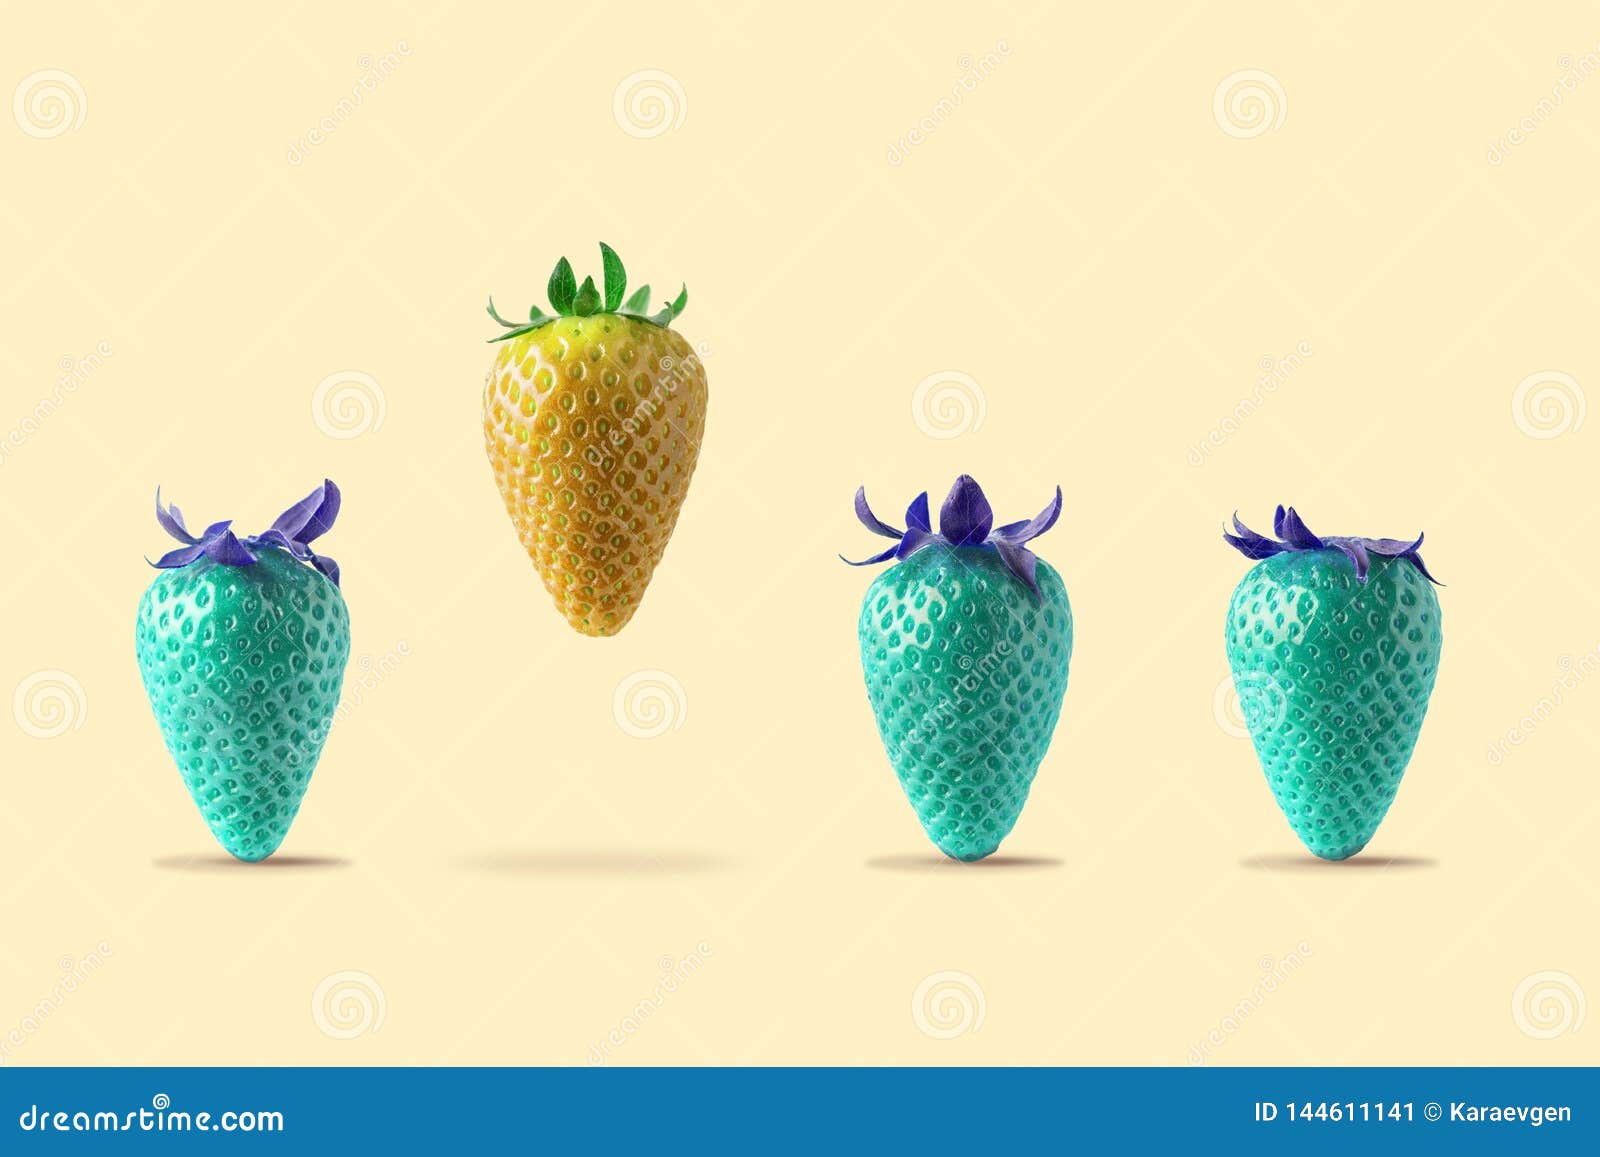 yellow strawberry floating with blue strawberry on bright background. minimal food concept